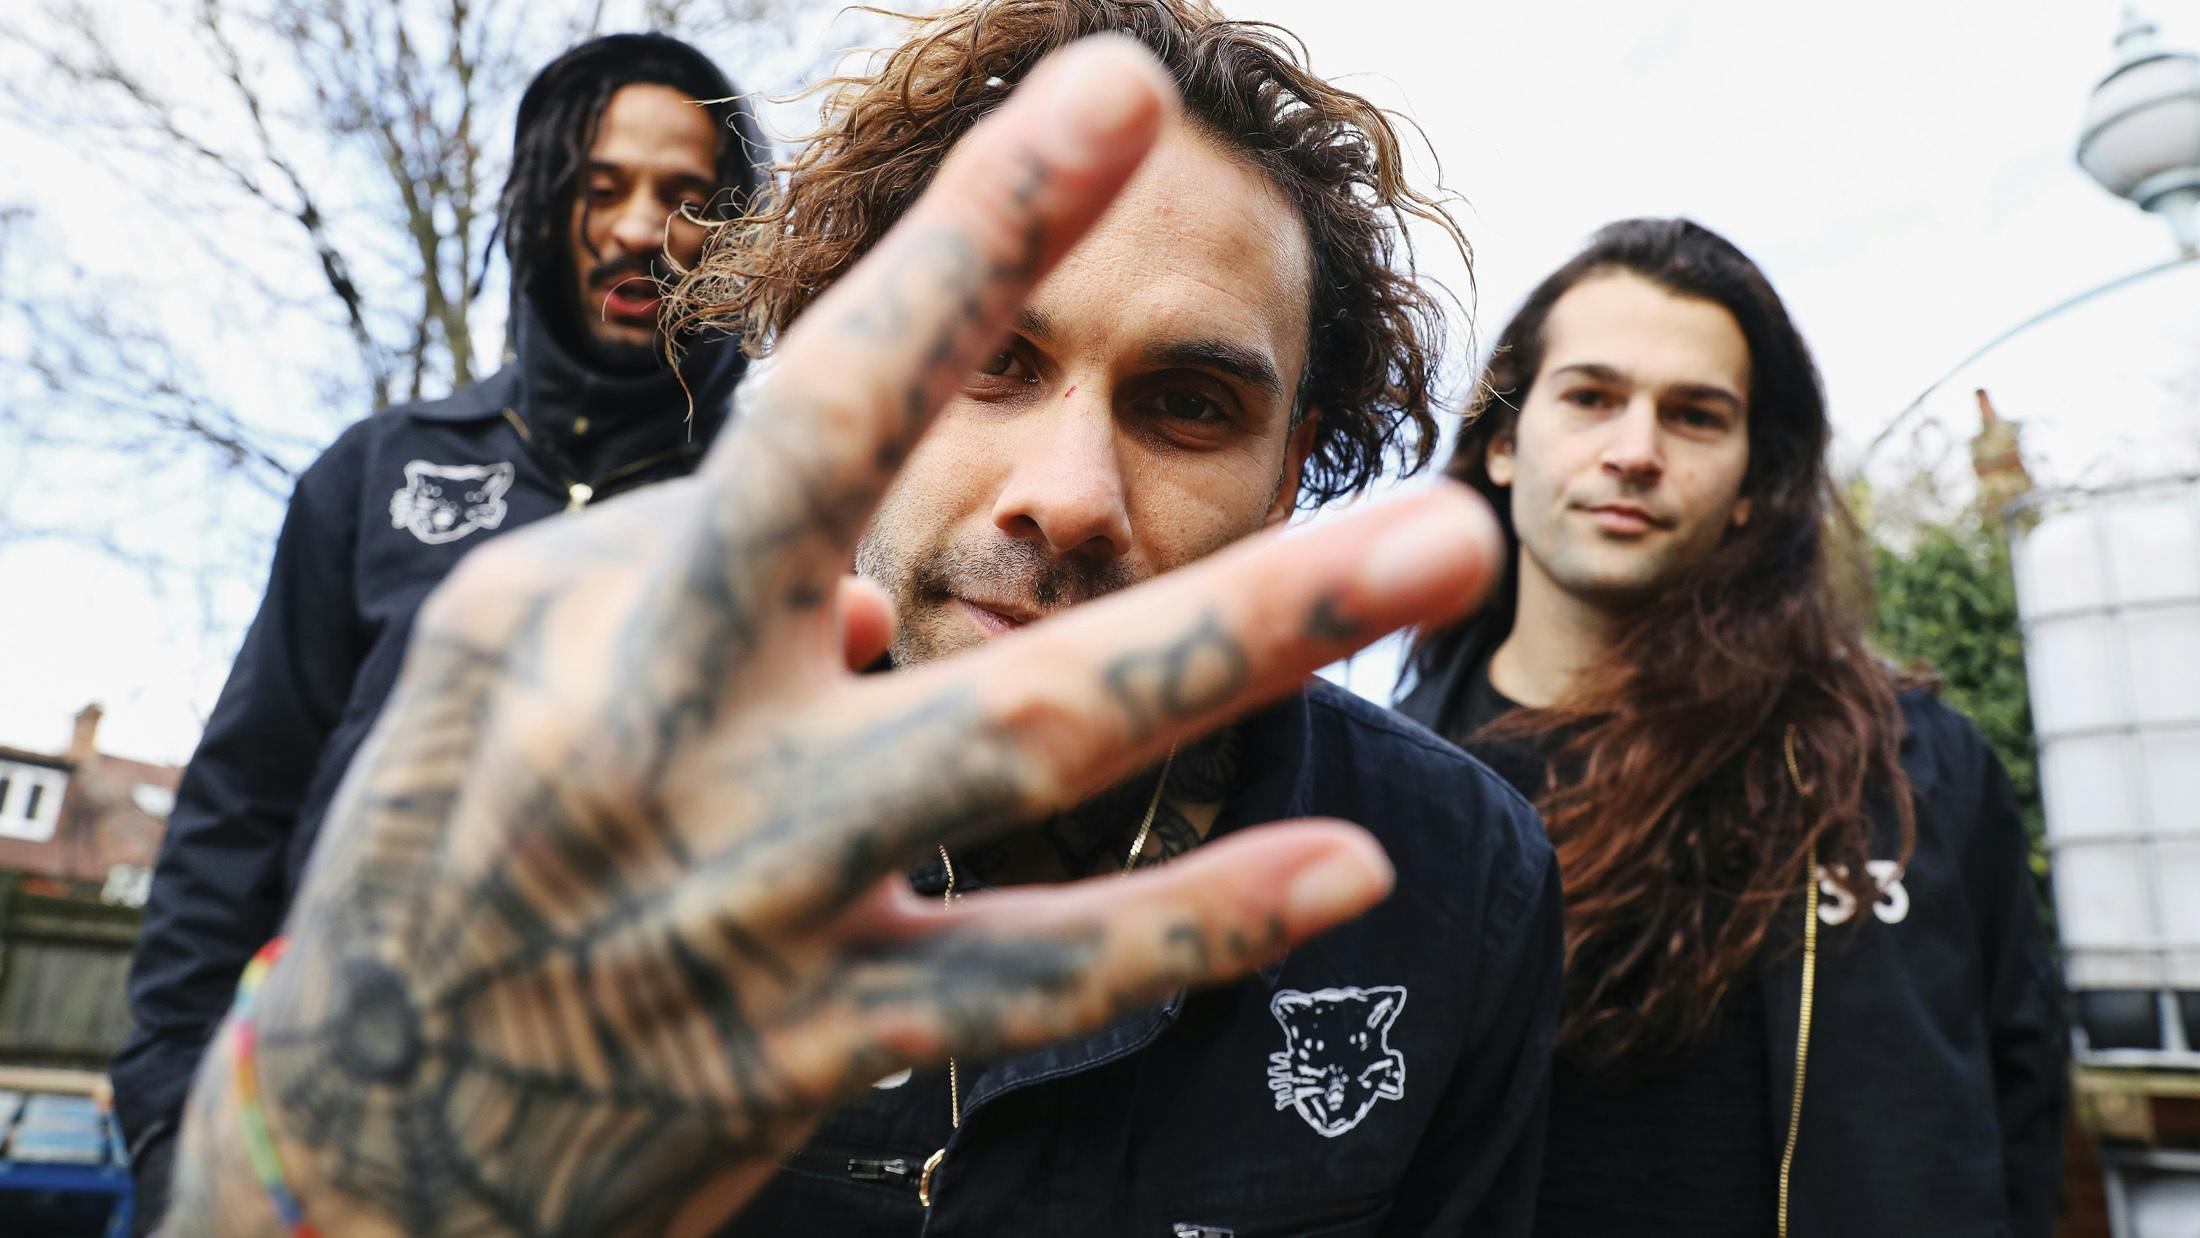 FEVER 333's Jason Aalon Butler On Family, Fatherhood And Fighting The Good Fight